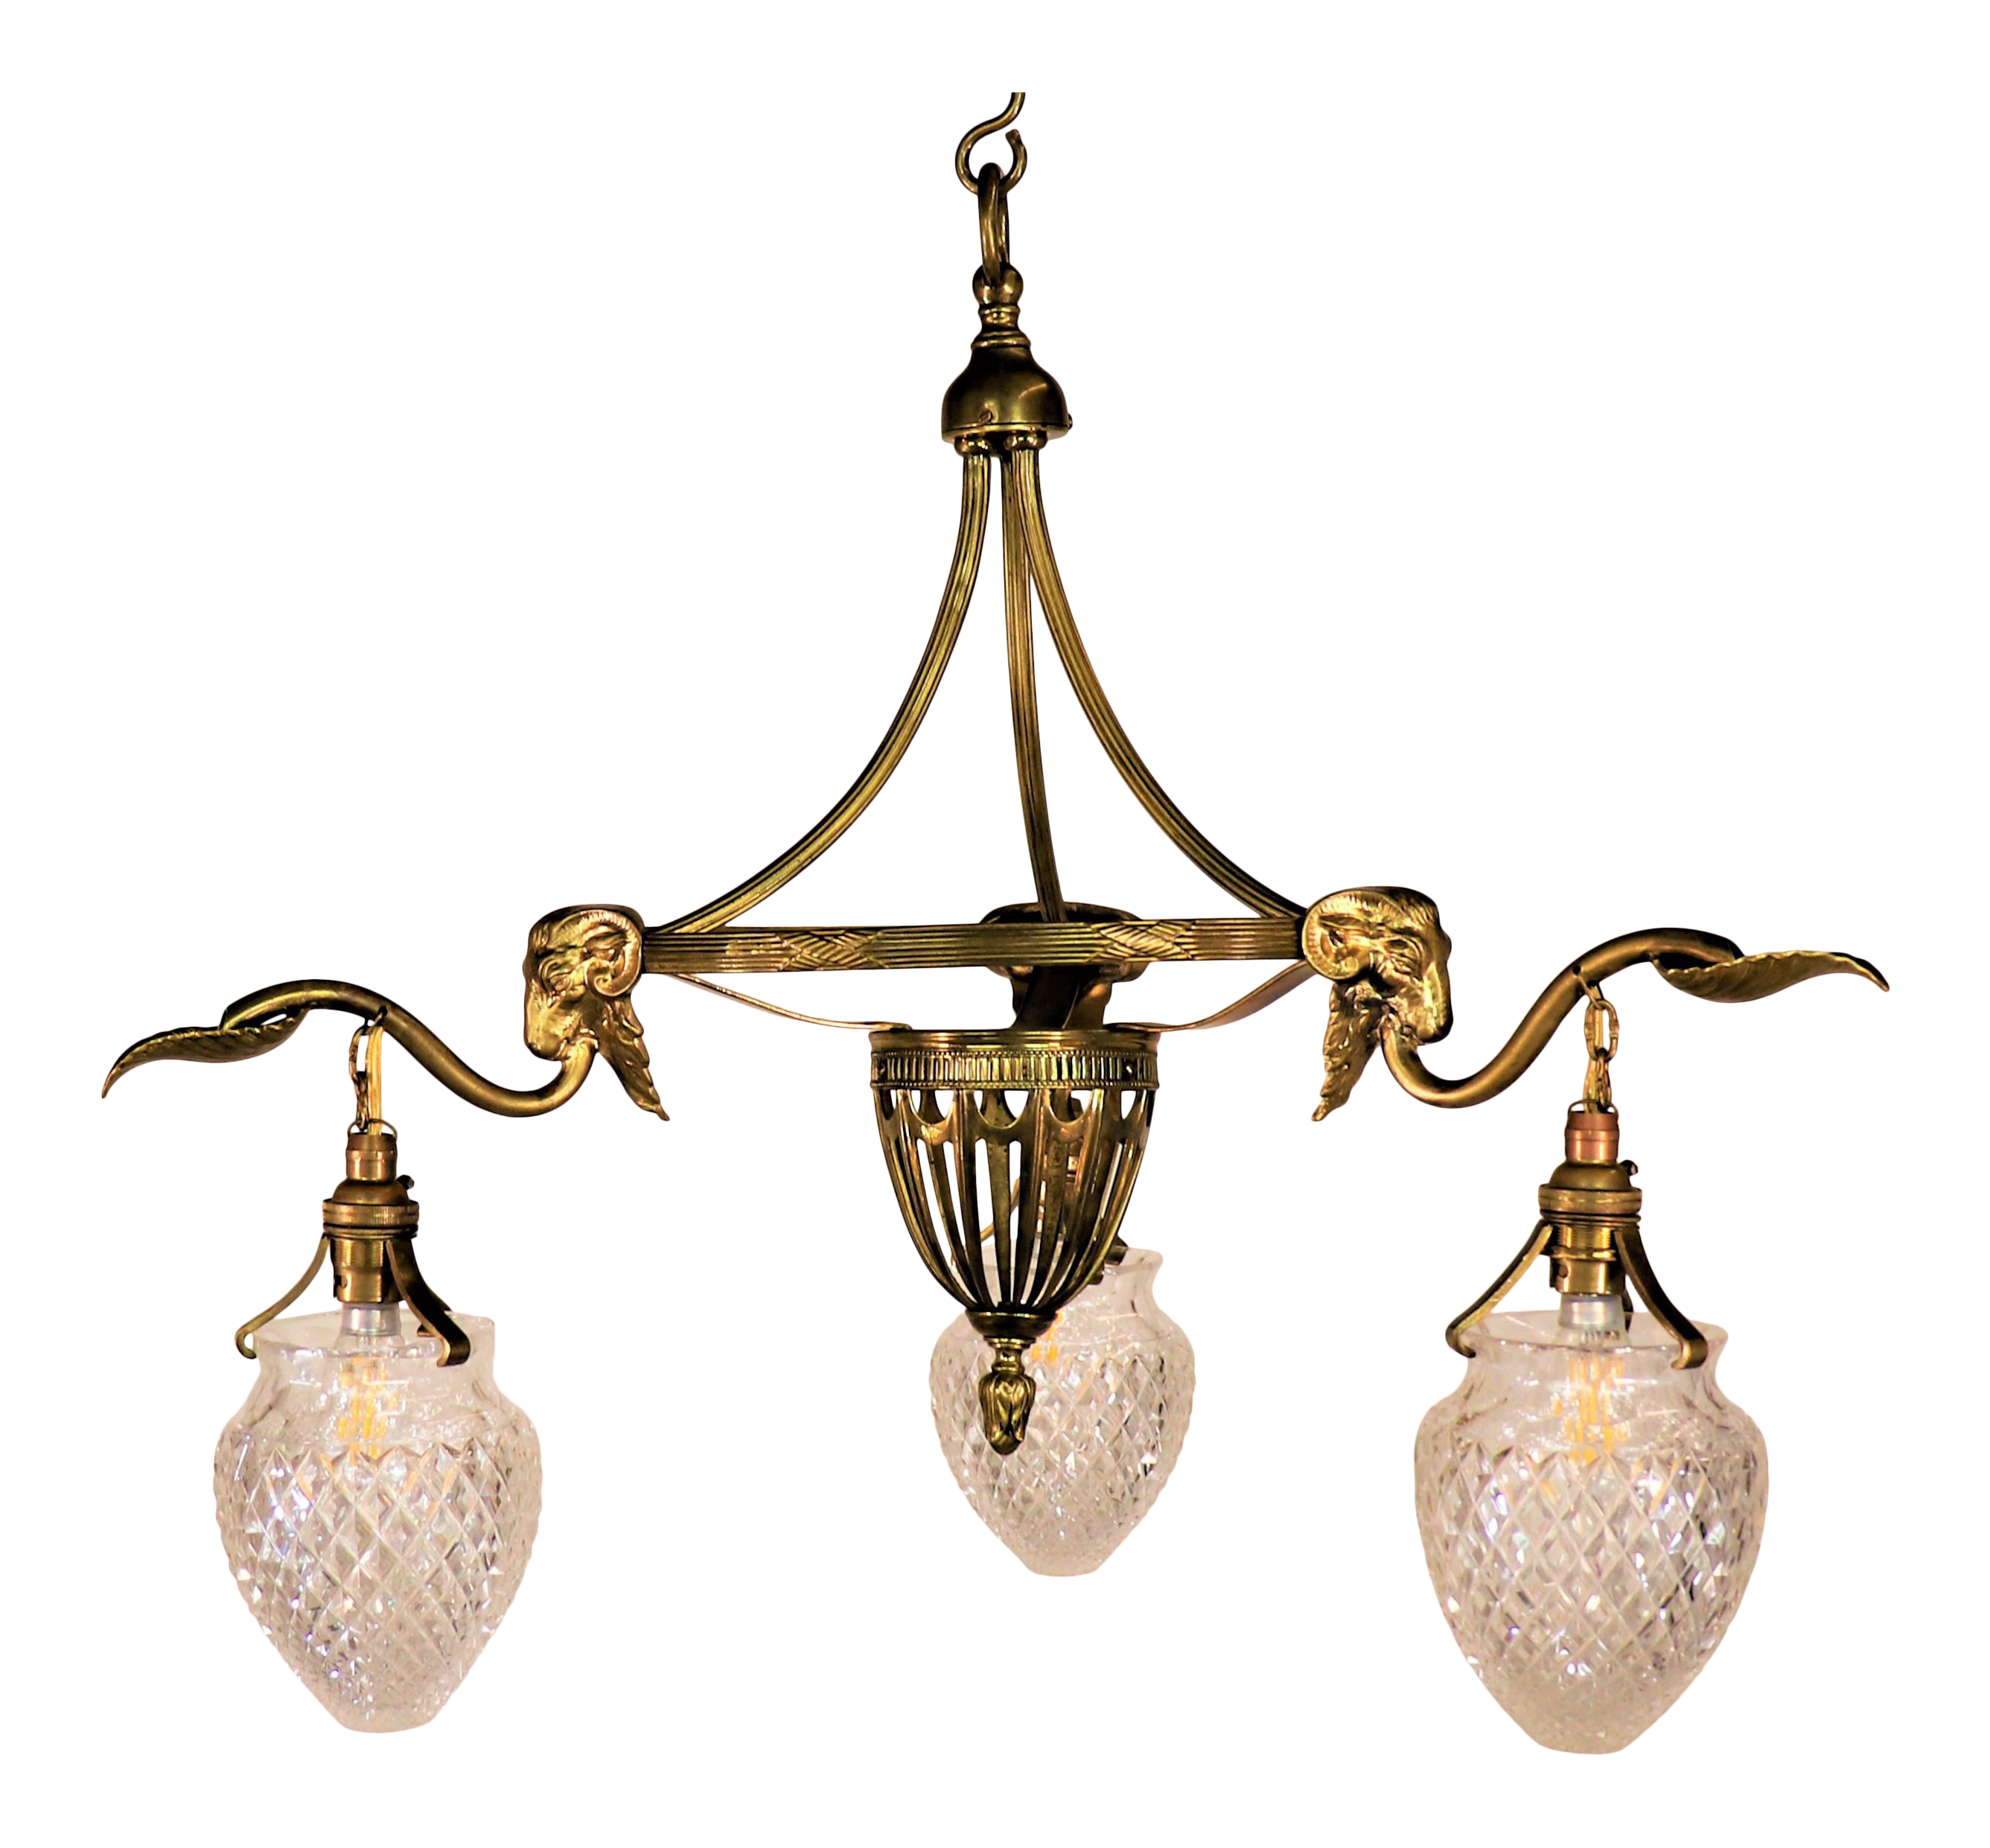 https://antiqueresourcesinc.com/wp-content/uploads/2021/10/circa-1920-french-neoclassical-ram-chandelier-with-crystal-pine-cones-9391.png